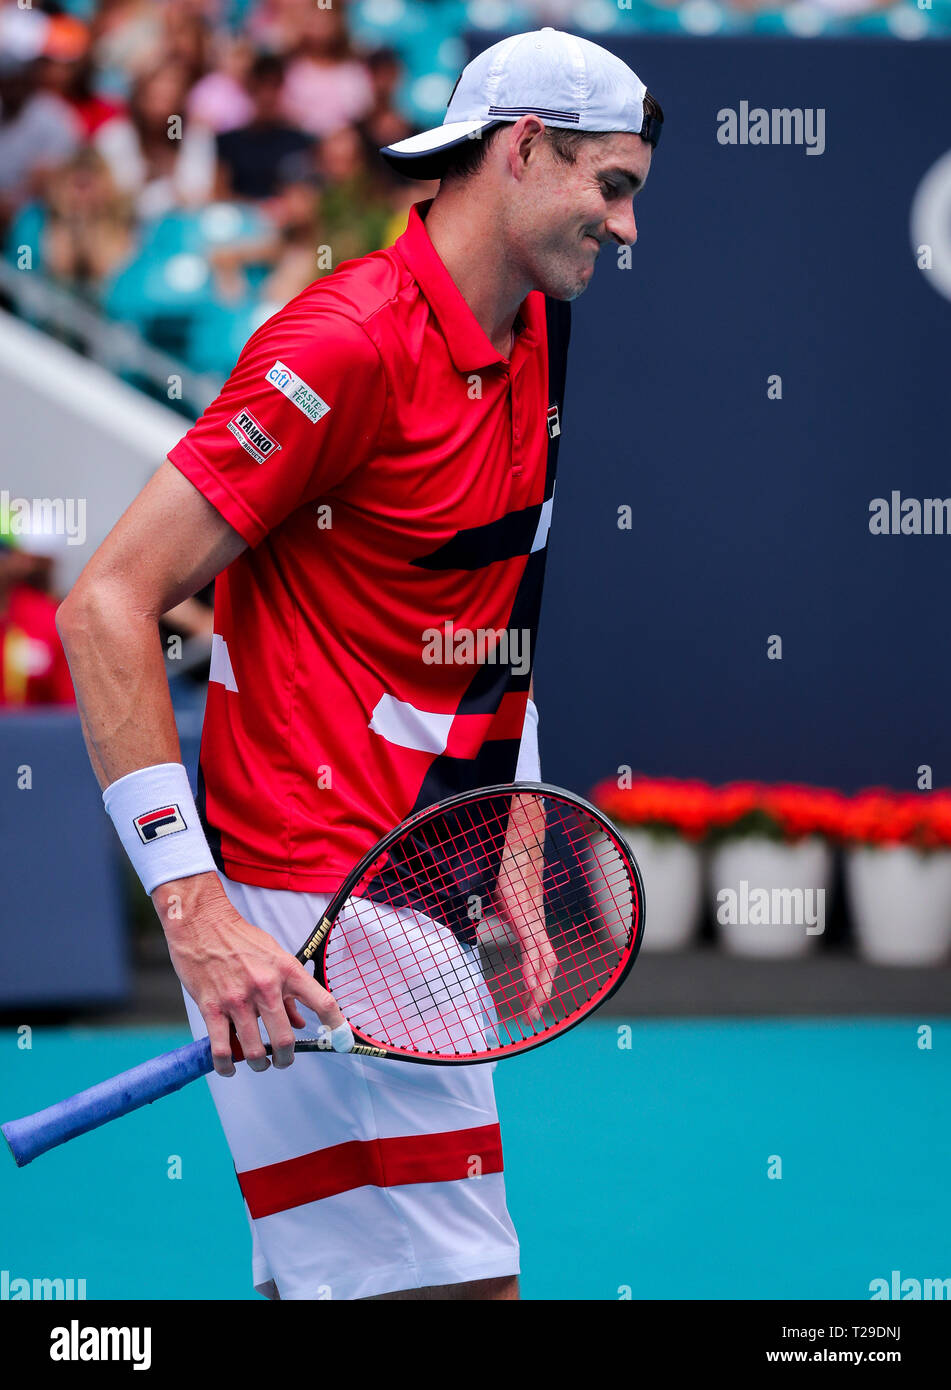 Miami Gardens, Florida, USA. 31st Mar, 2019. John Isner, of the United States, looks in pain during his match against Roger Federer, of Switzerland, in the Men's Singles final of the 2019 Miami Open Presented by Itau professional tennis tournament, played at the Hardrock Stadium in Miami Gardens, Florida, USA. Federer won 6-1, 6-4. Mario Houben/CSM/Alamy Live News Stock Photo